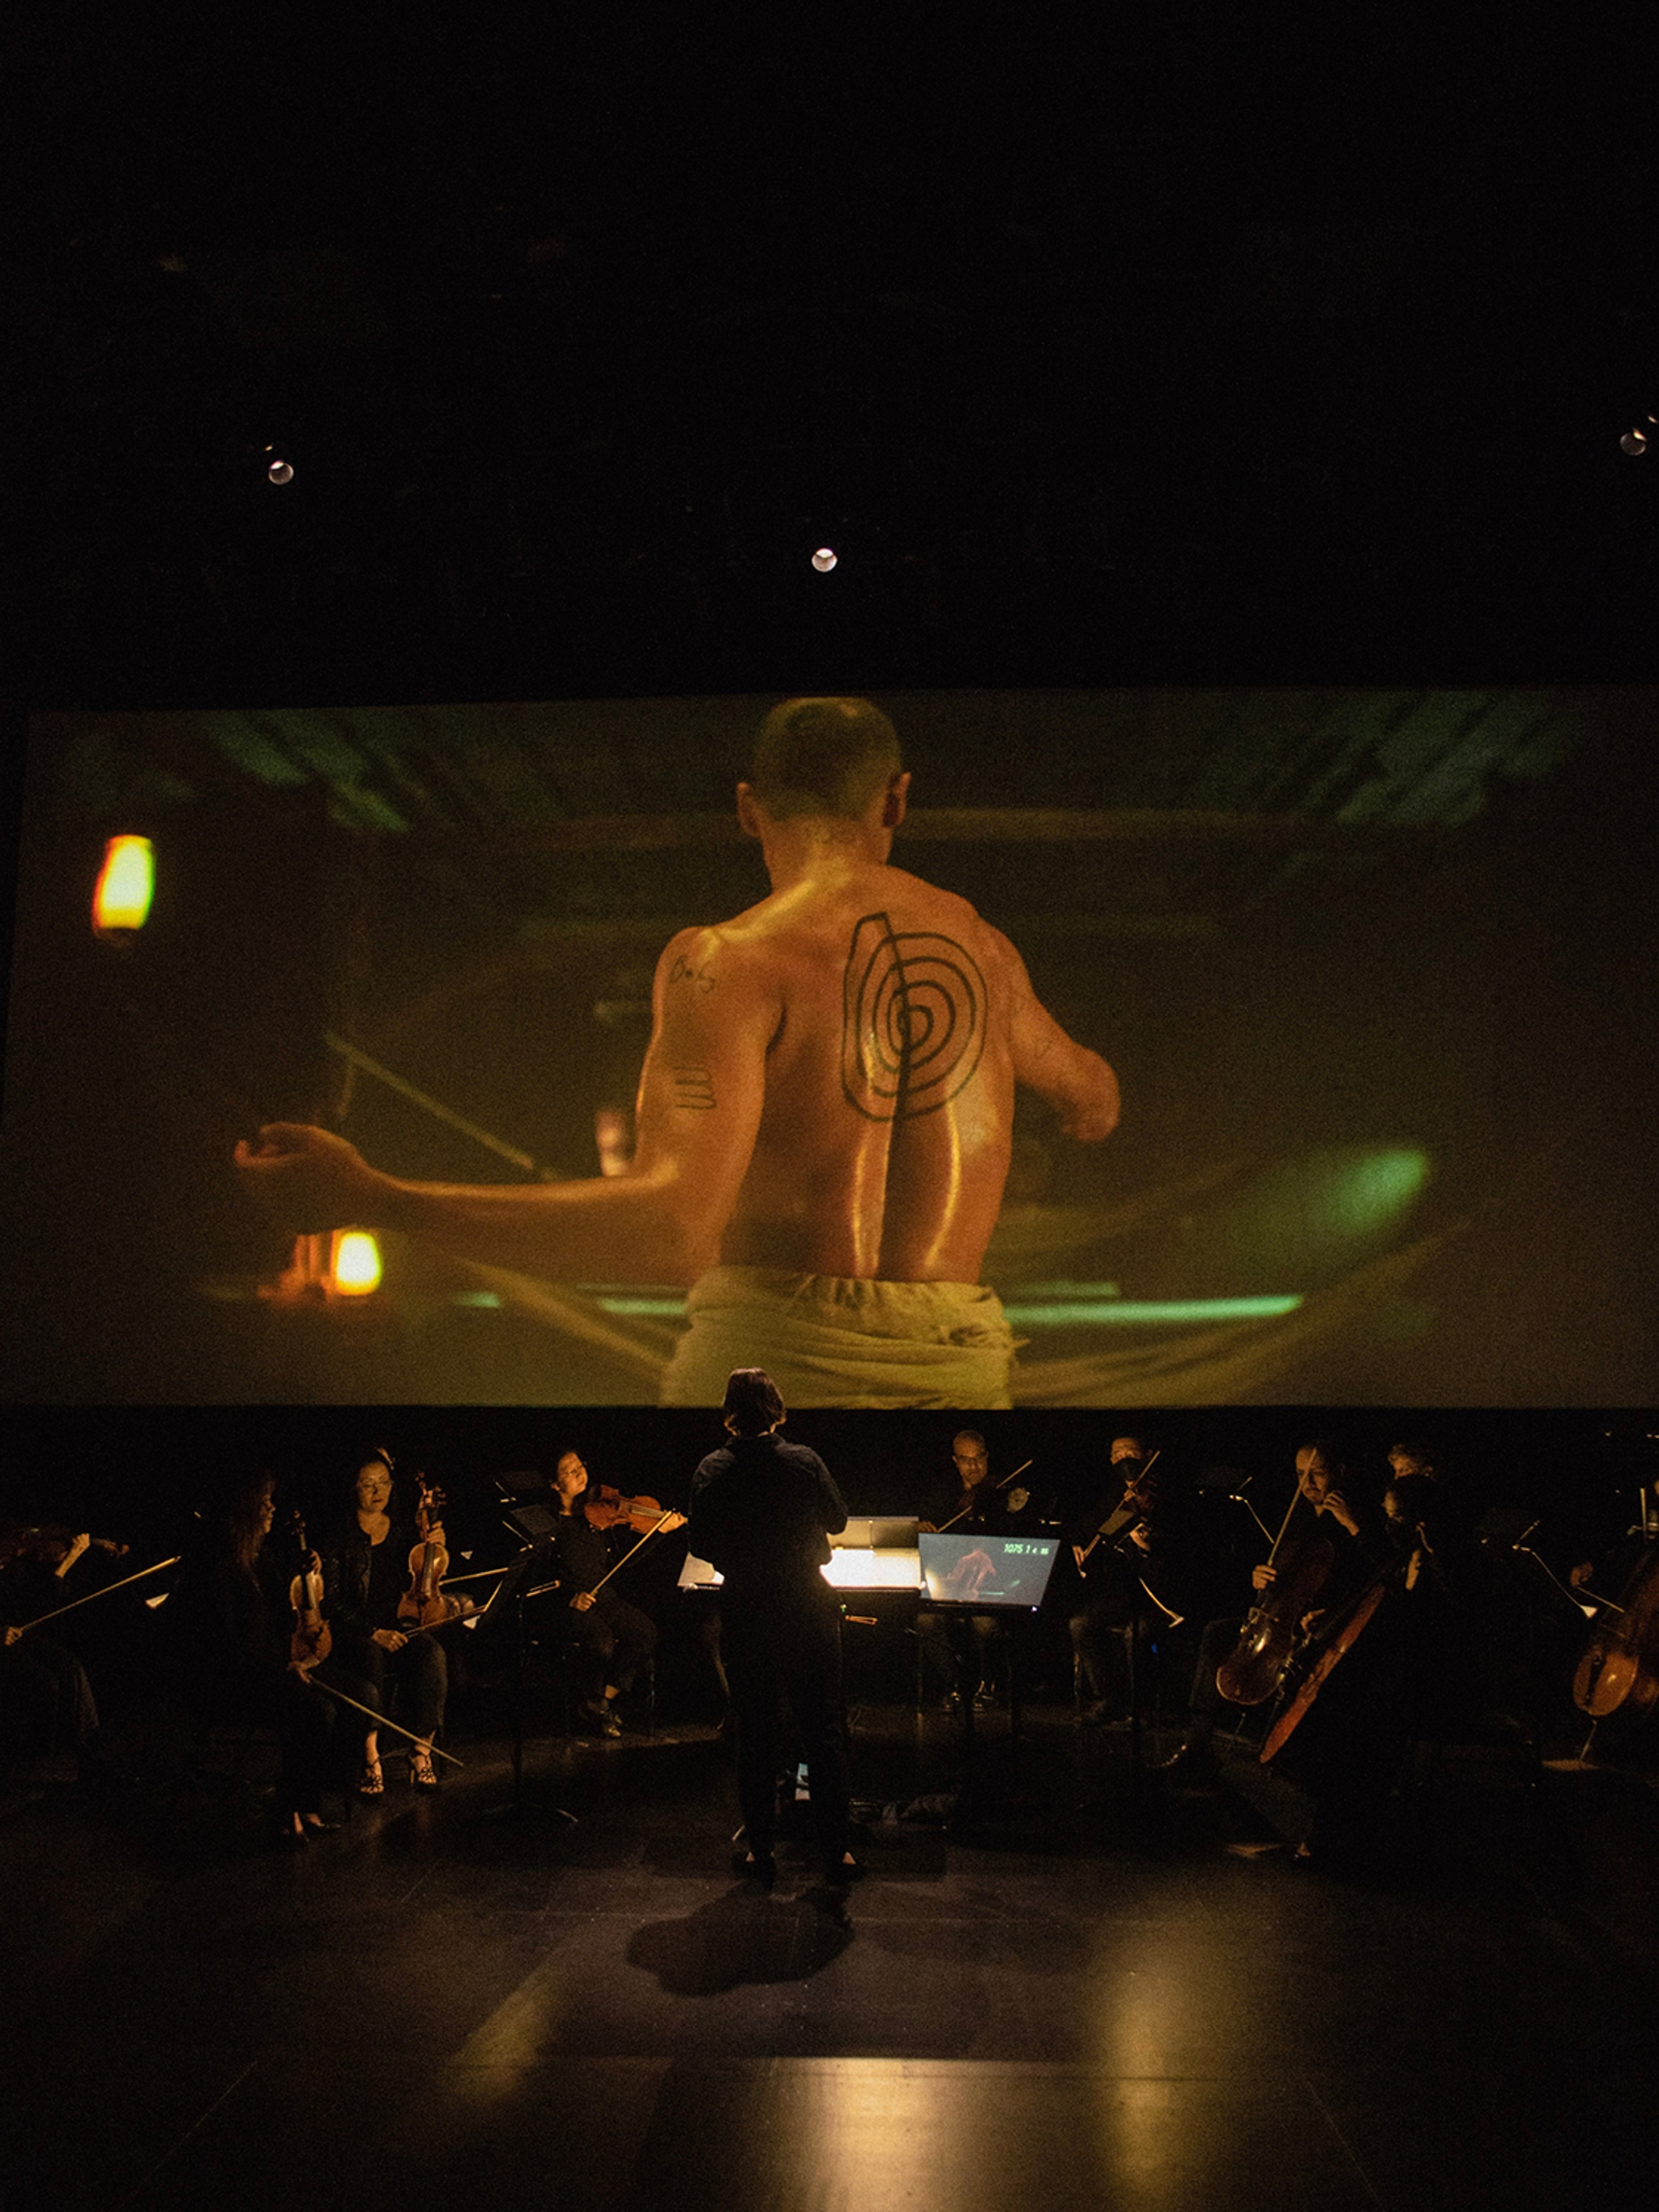 A small orchestra plays in a dark theater space in front of a film screen. On the screen is projected a scene from Wu Tsang's Moby Dick: a shirtless person with a tattooed muscular back stands with arms out to the side.